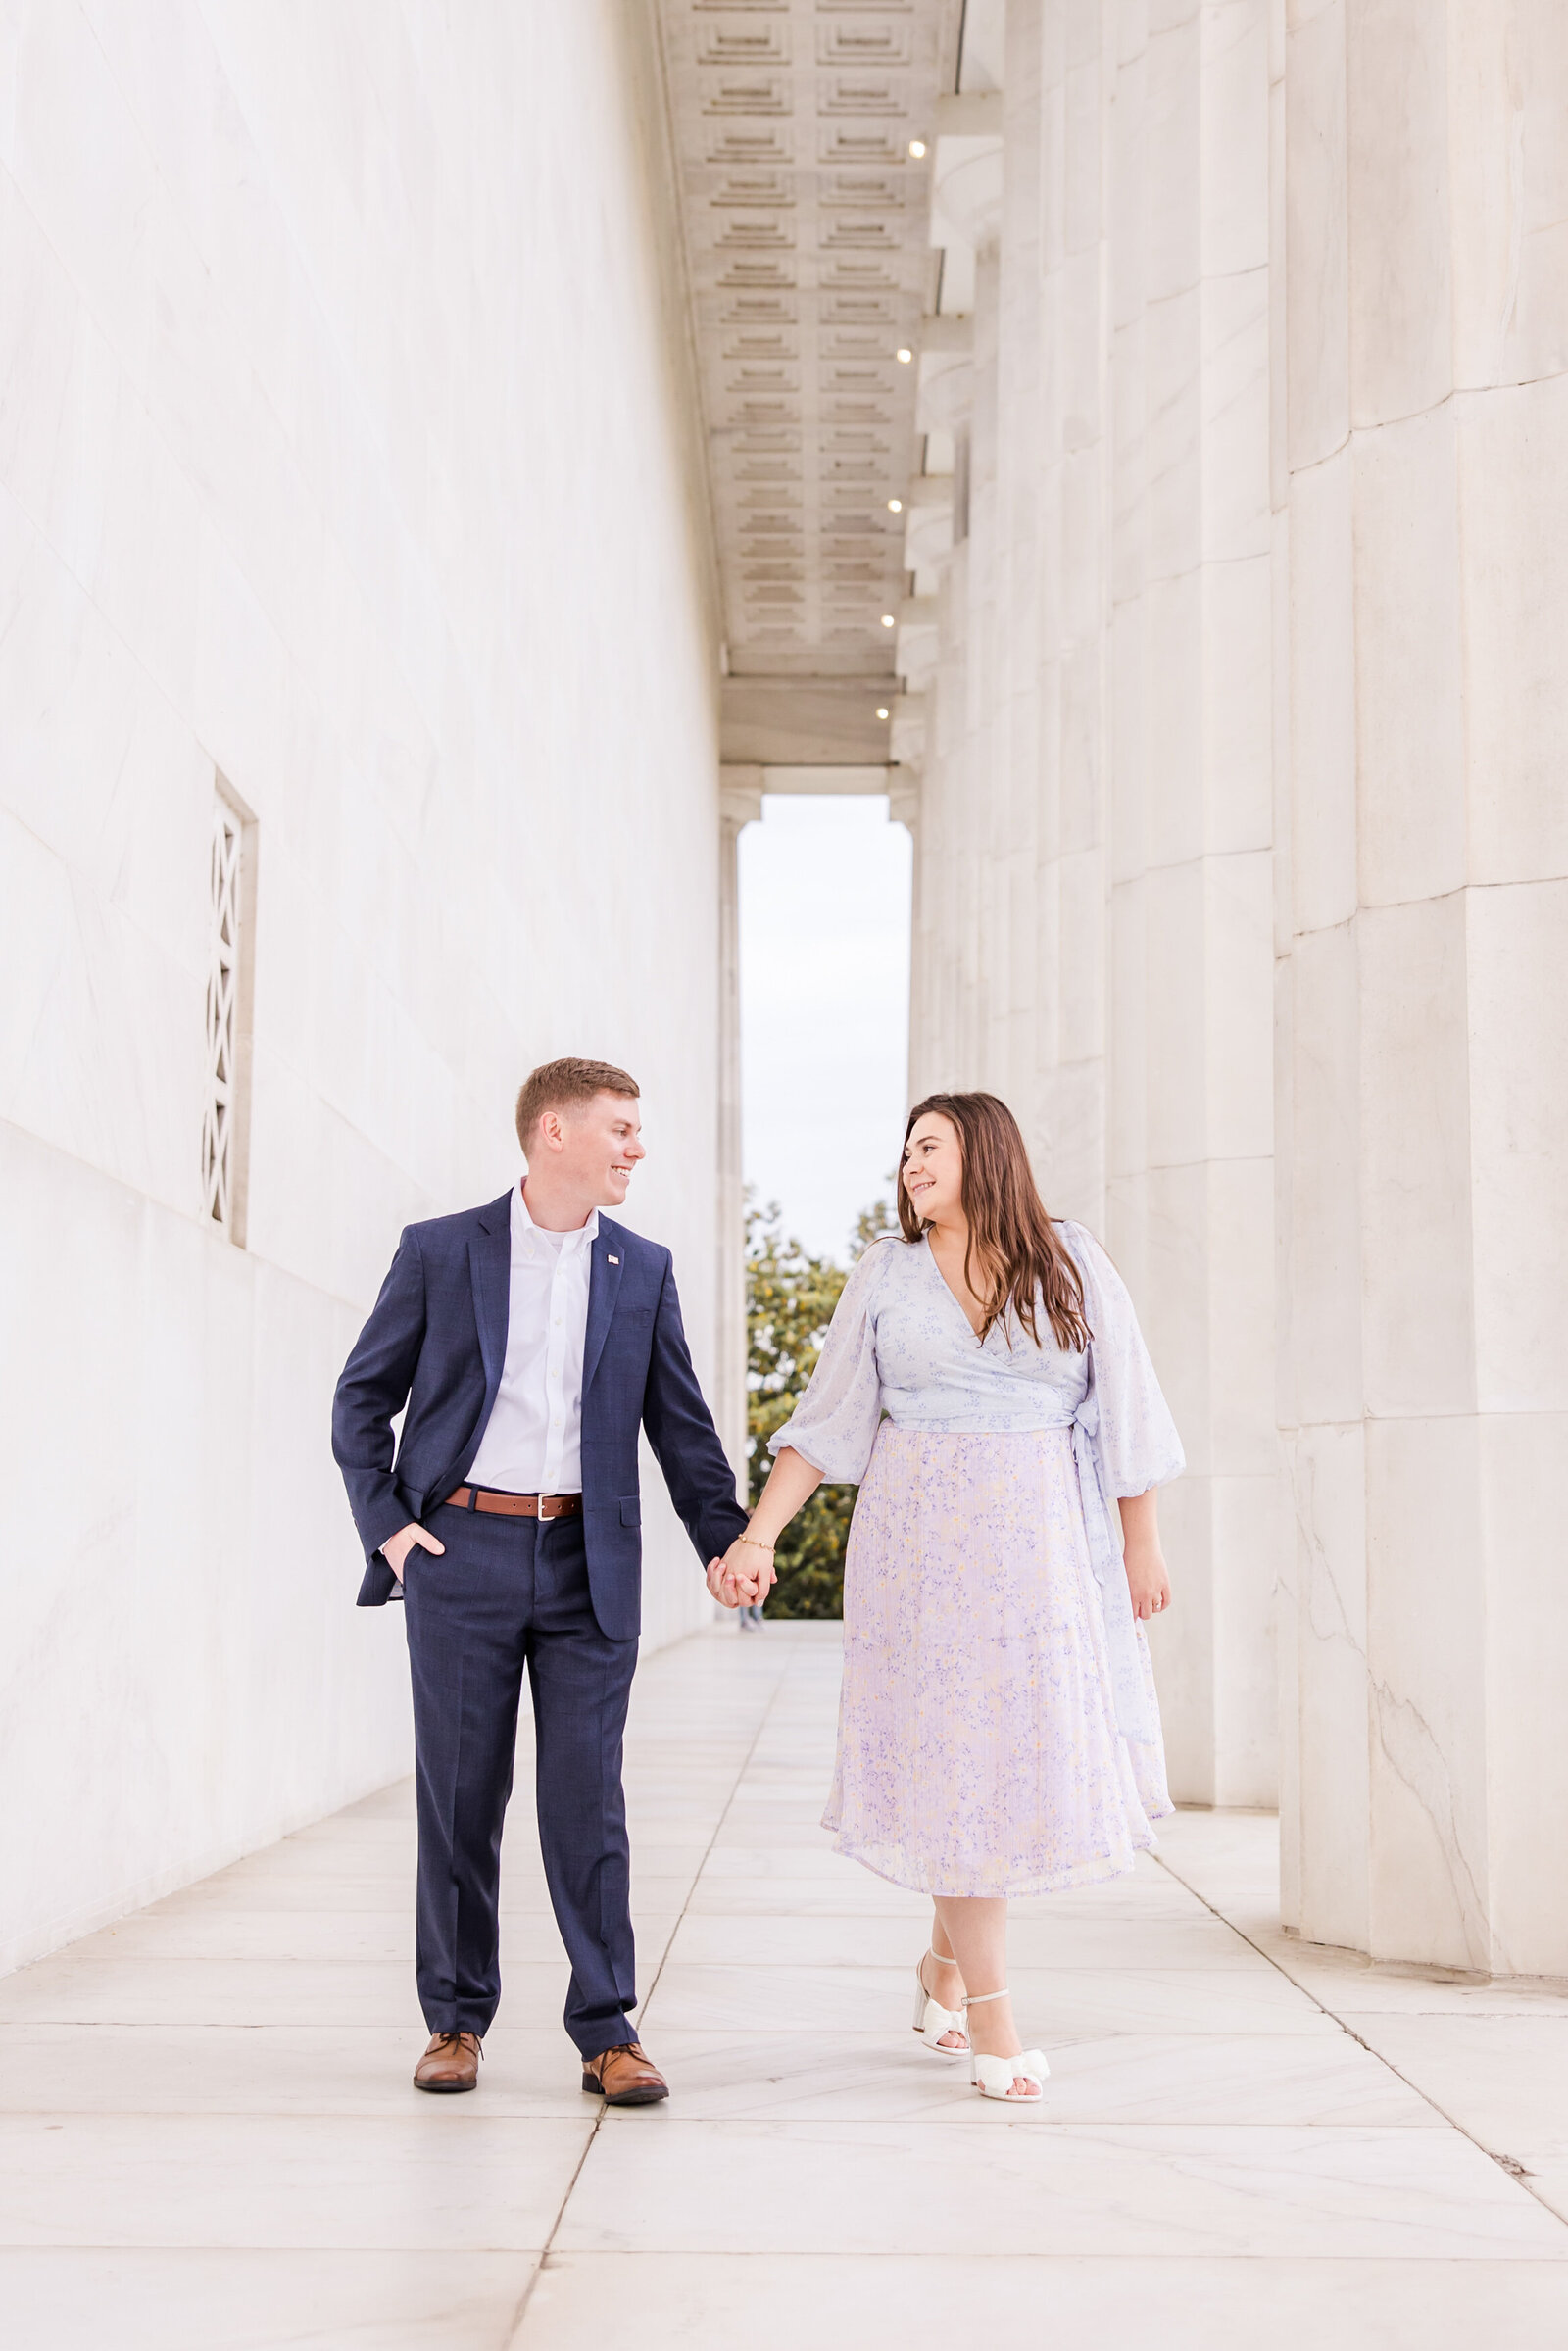 28Lincoln_Memorial_Engagement_Photo_Photographer_Carter64